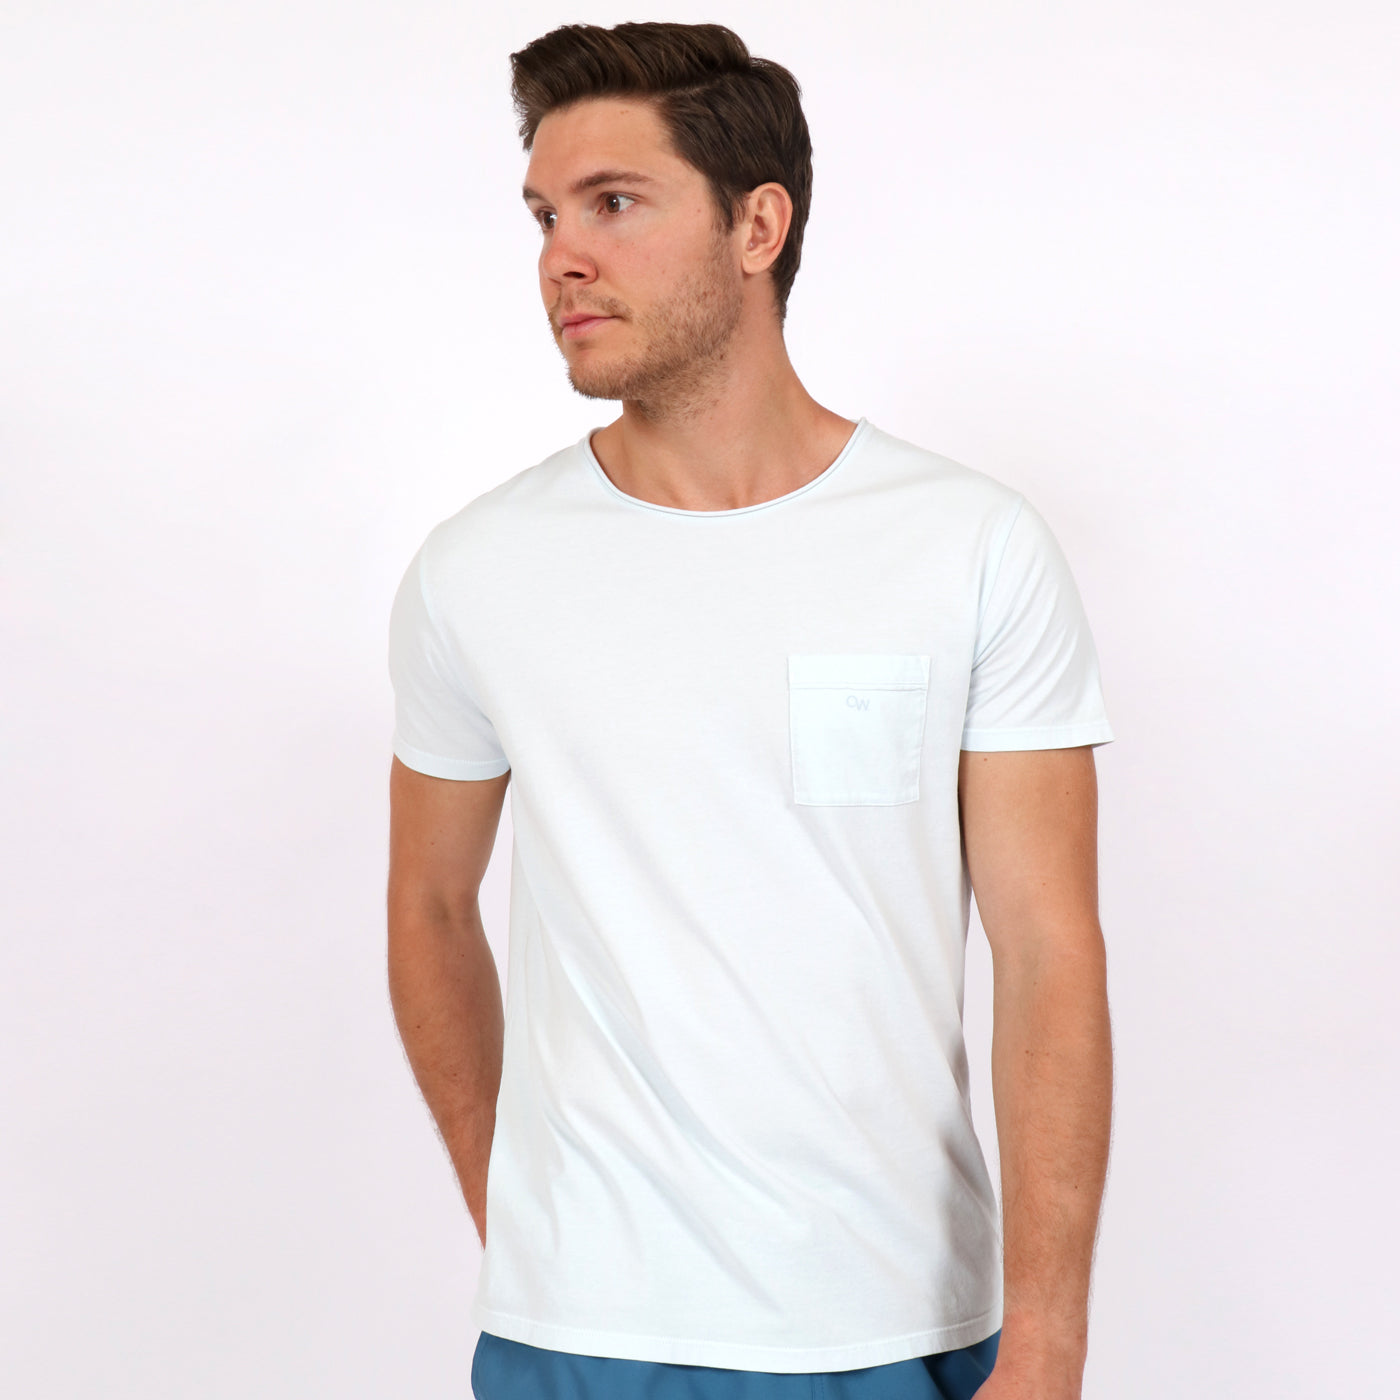 OWTS1804 Ice Blue garment dyed beach fit men's organic cotton t-shirt with chest pocket detail on body front view